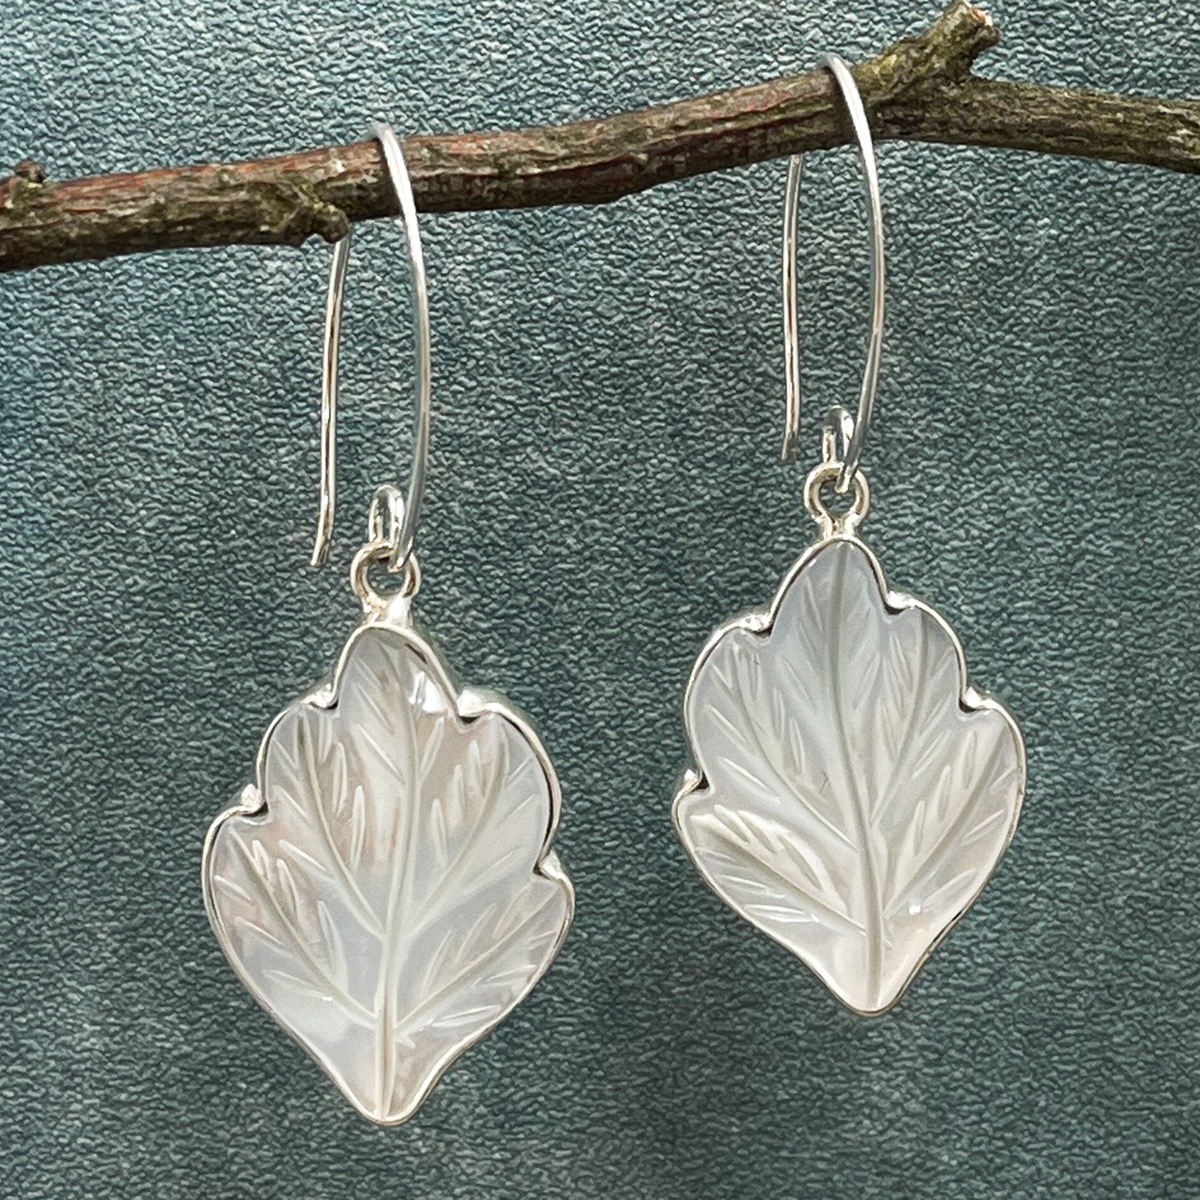 Pearla - Carved Mother of Pearl Leaf Silver Earrings - Dangle